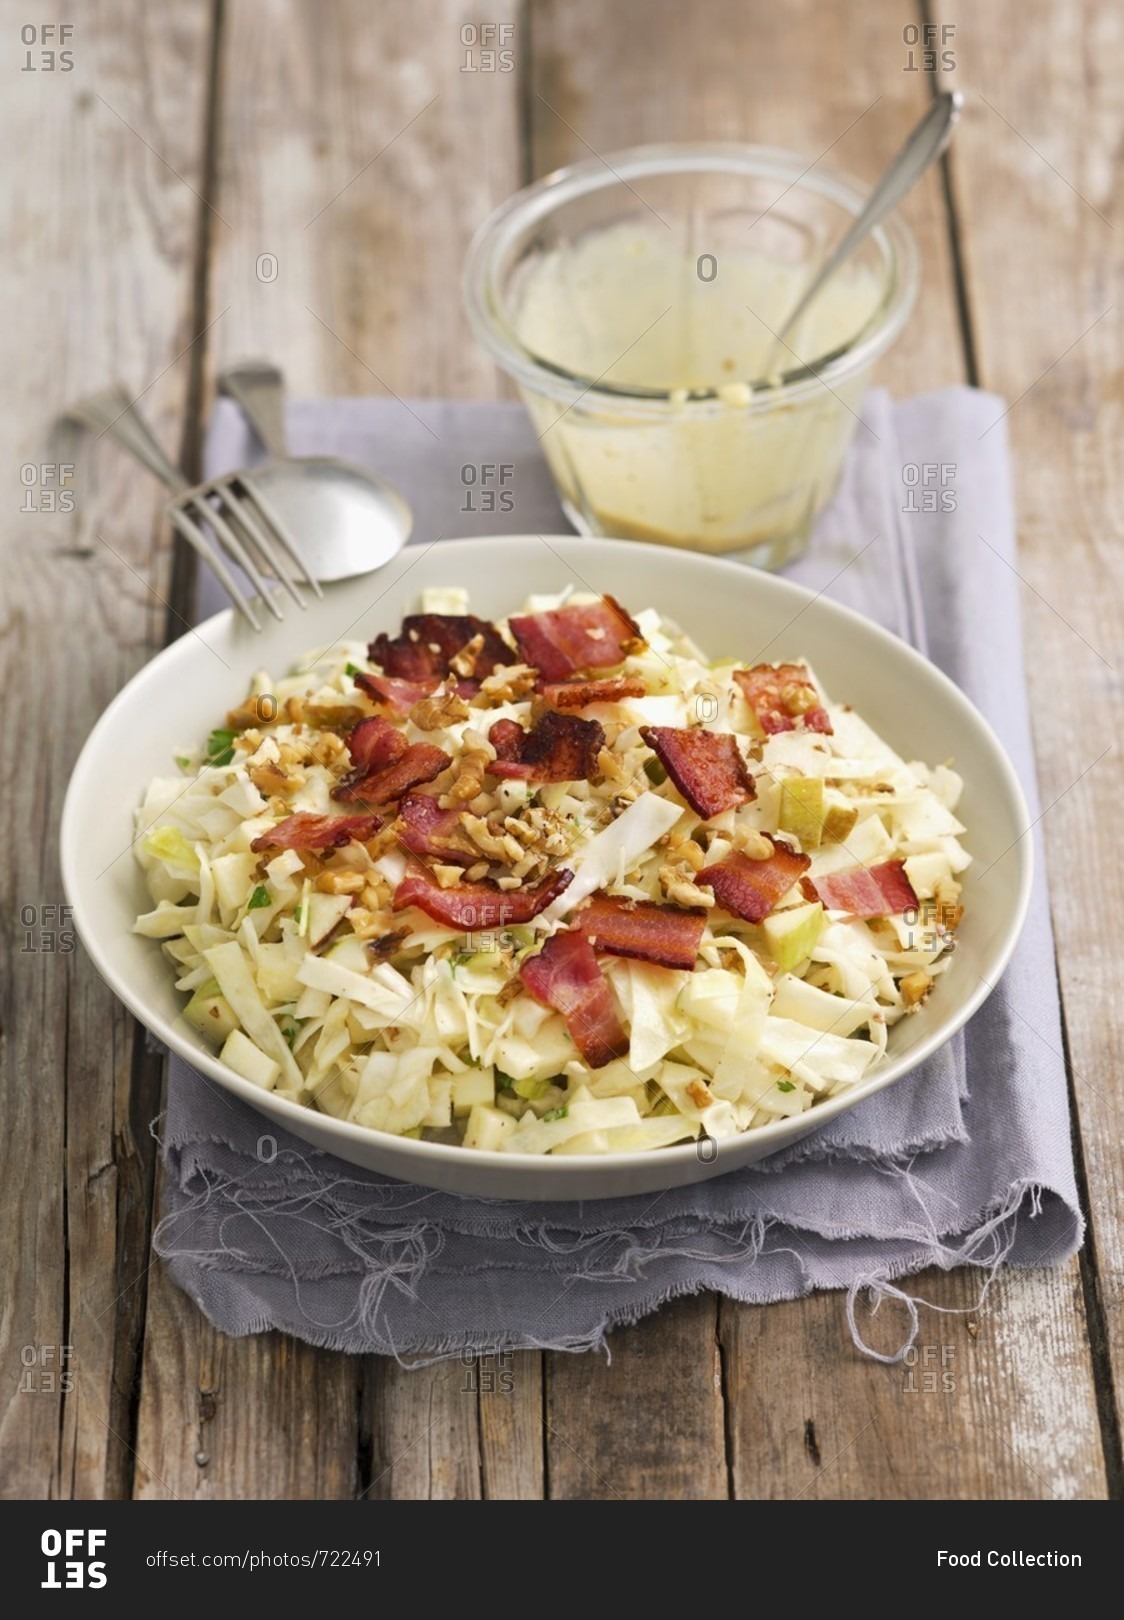 White cabbage salad with apples, walnuts, pancetta and a mustard vinaigrette